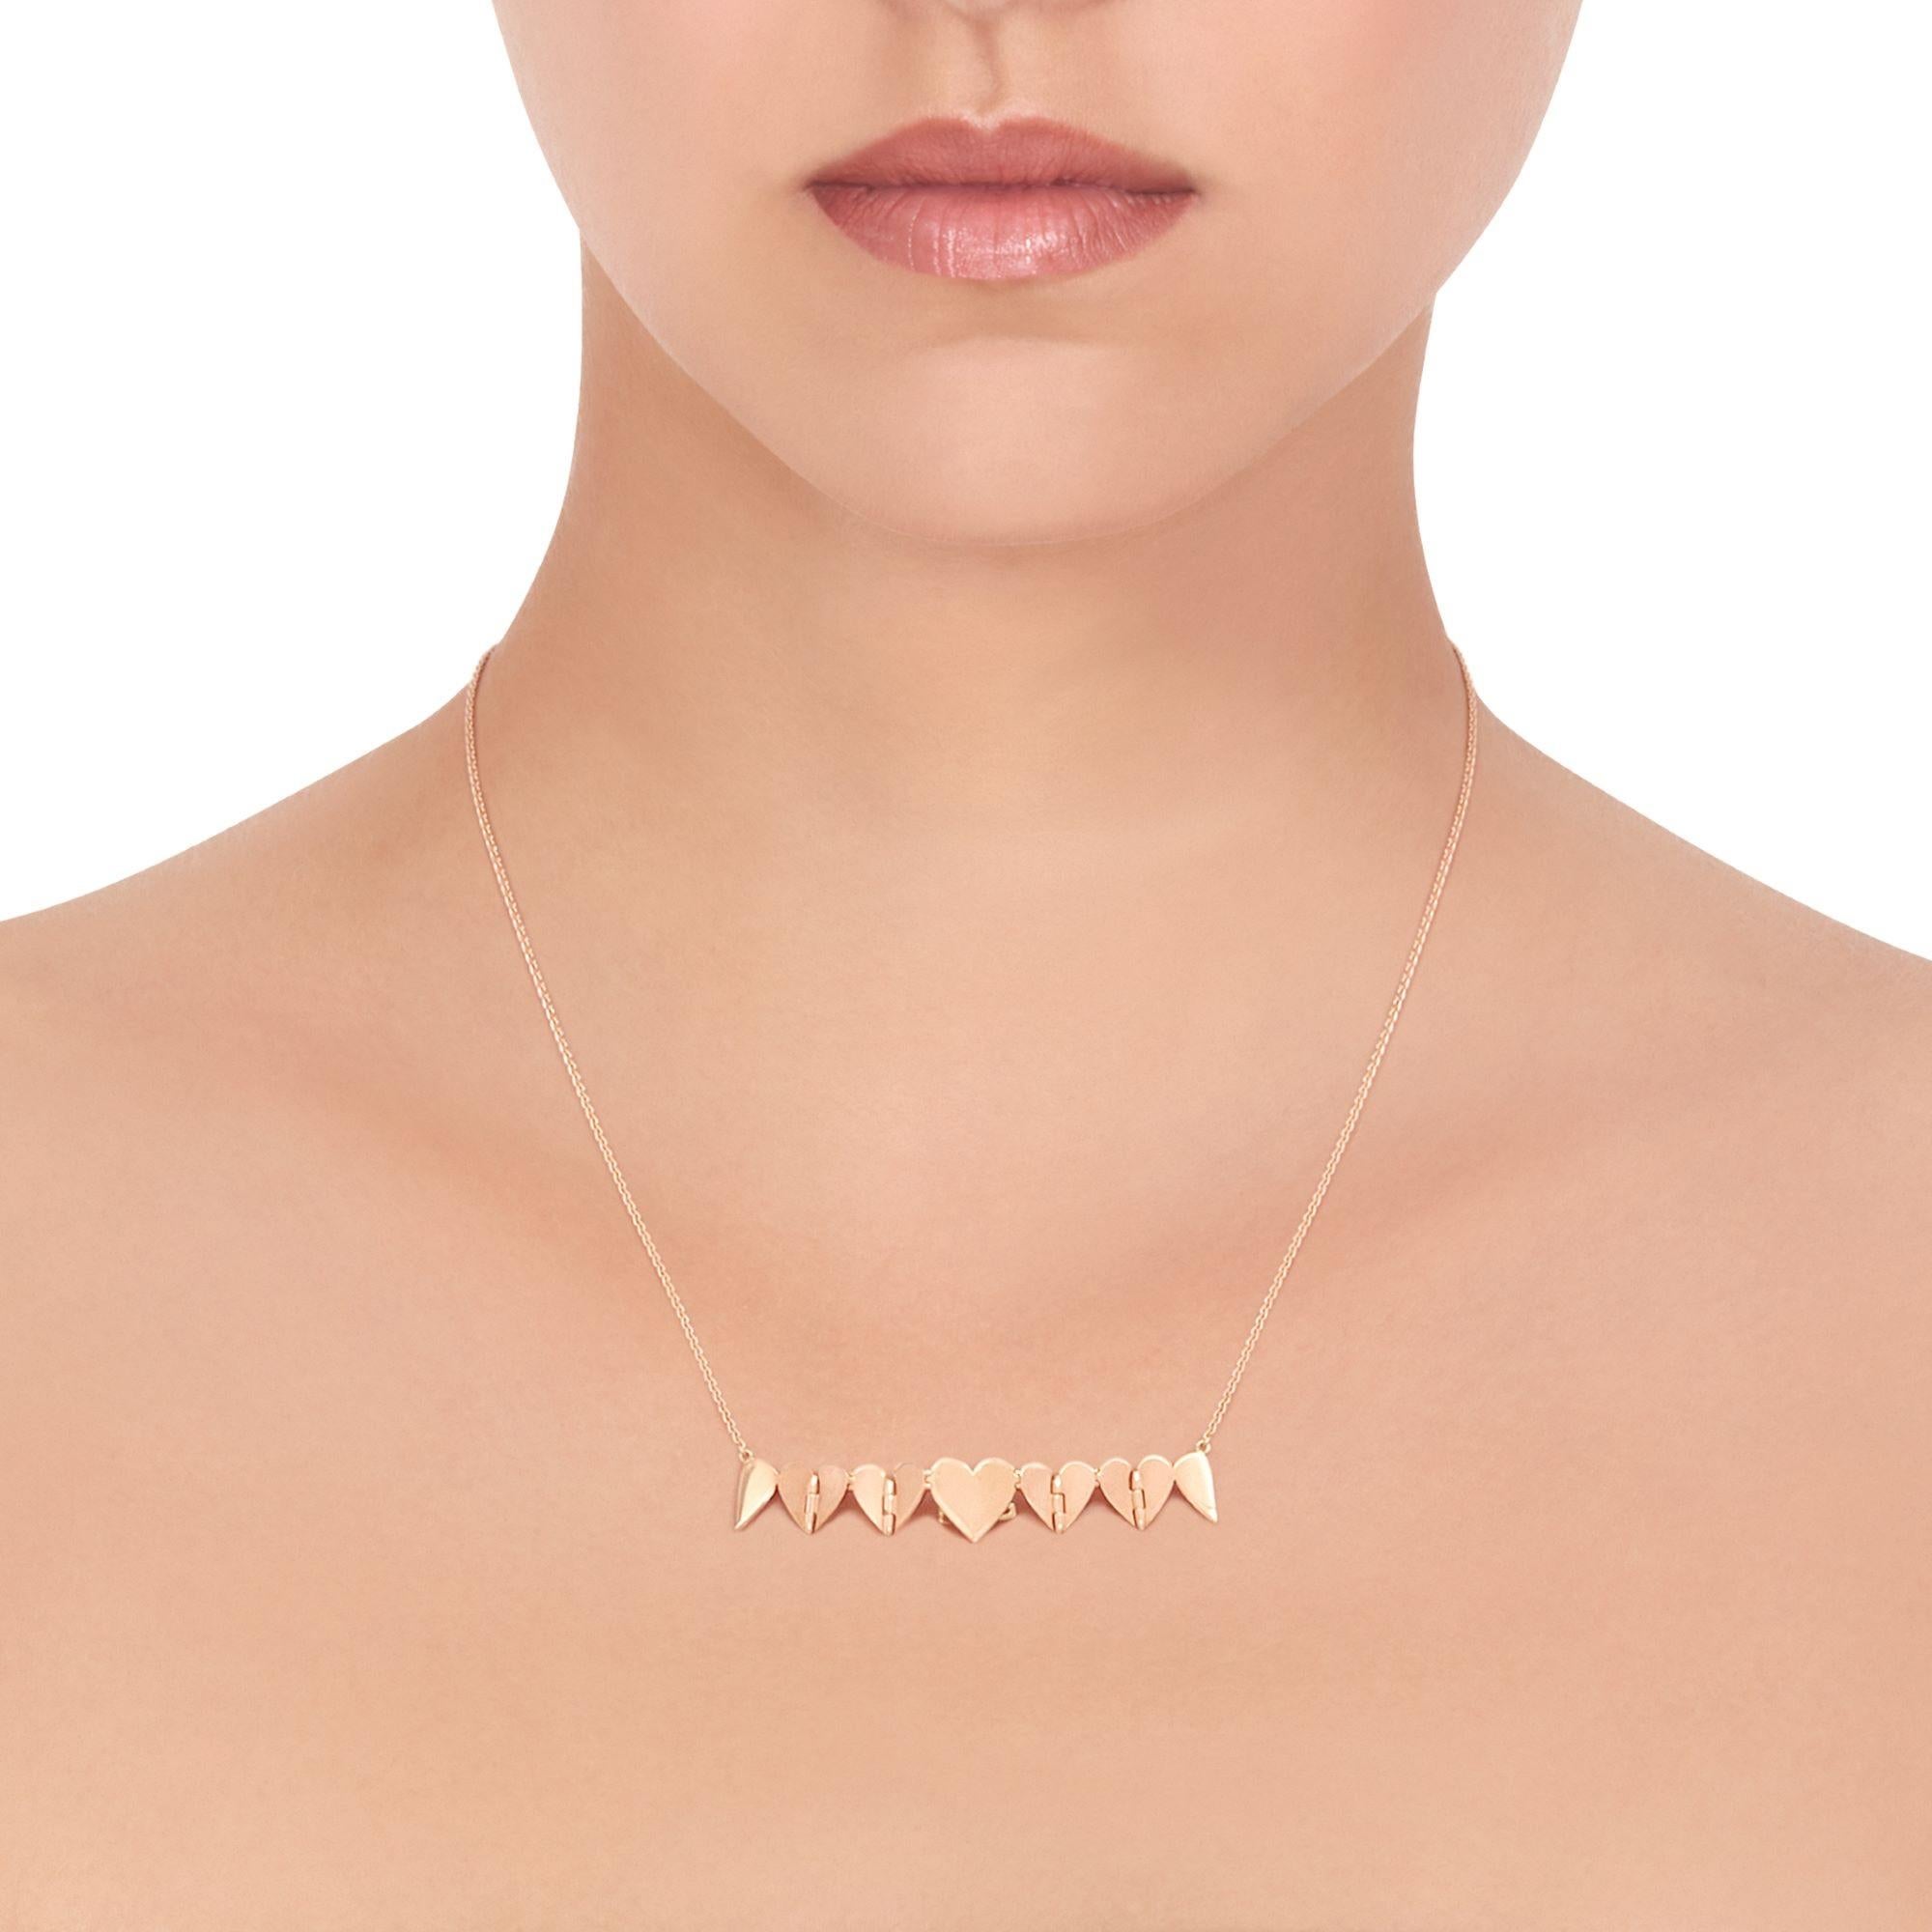 Euphoria of love. The classic heart motif pendant unfurls and expands like fluttering butterflies brought on by new love. Handcrafted in high polished 18K yellow gold. Adjustable to 16